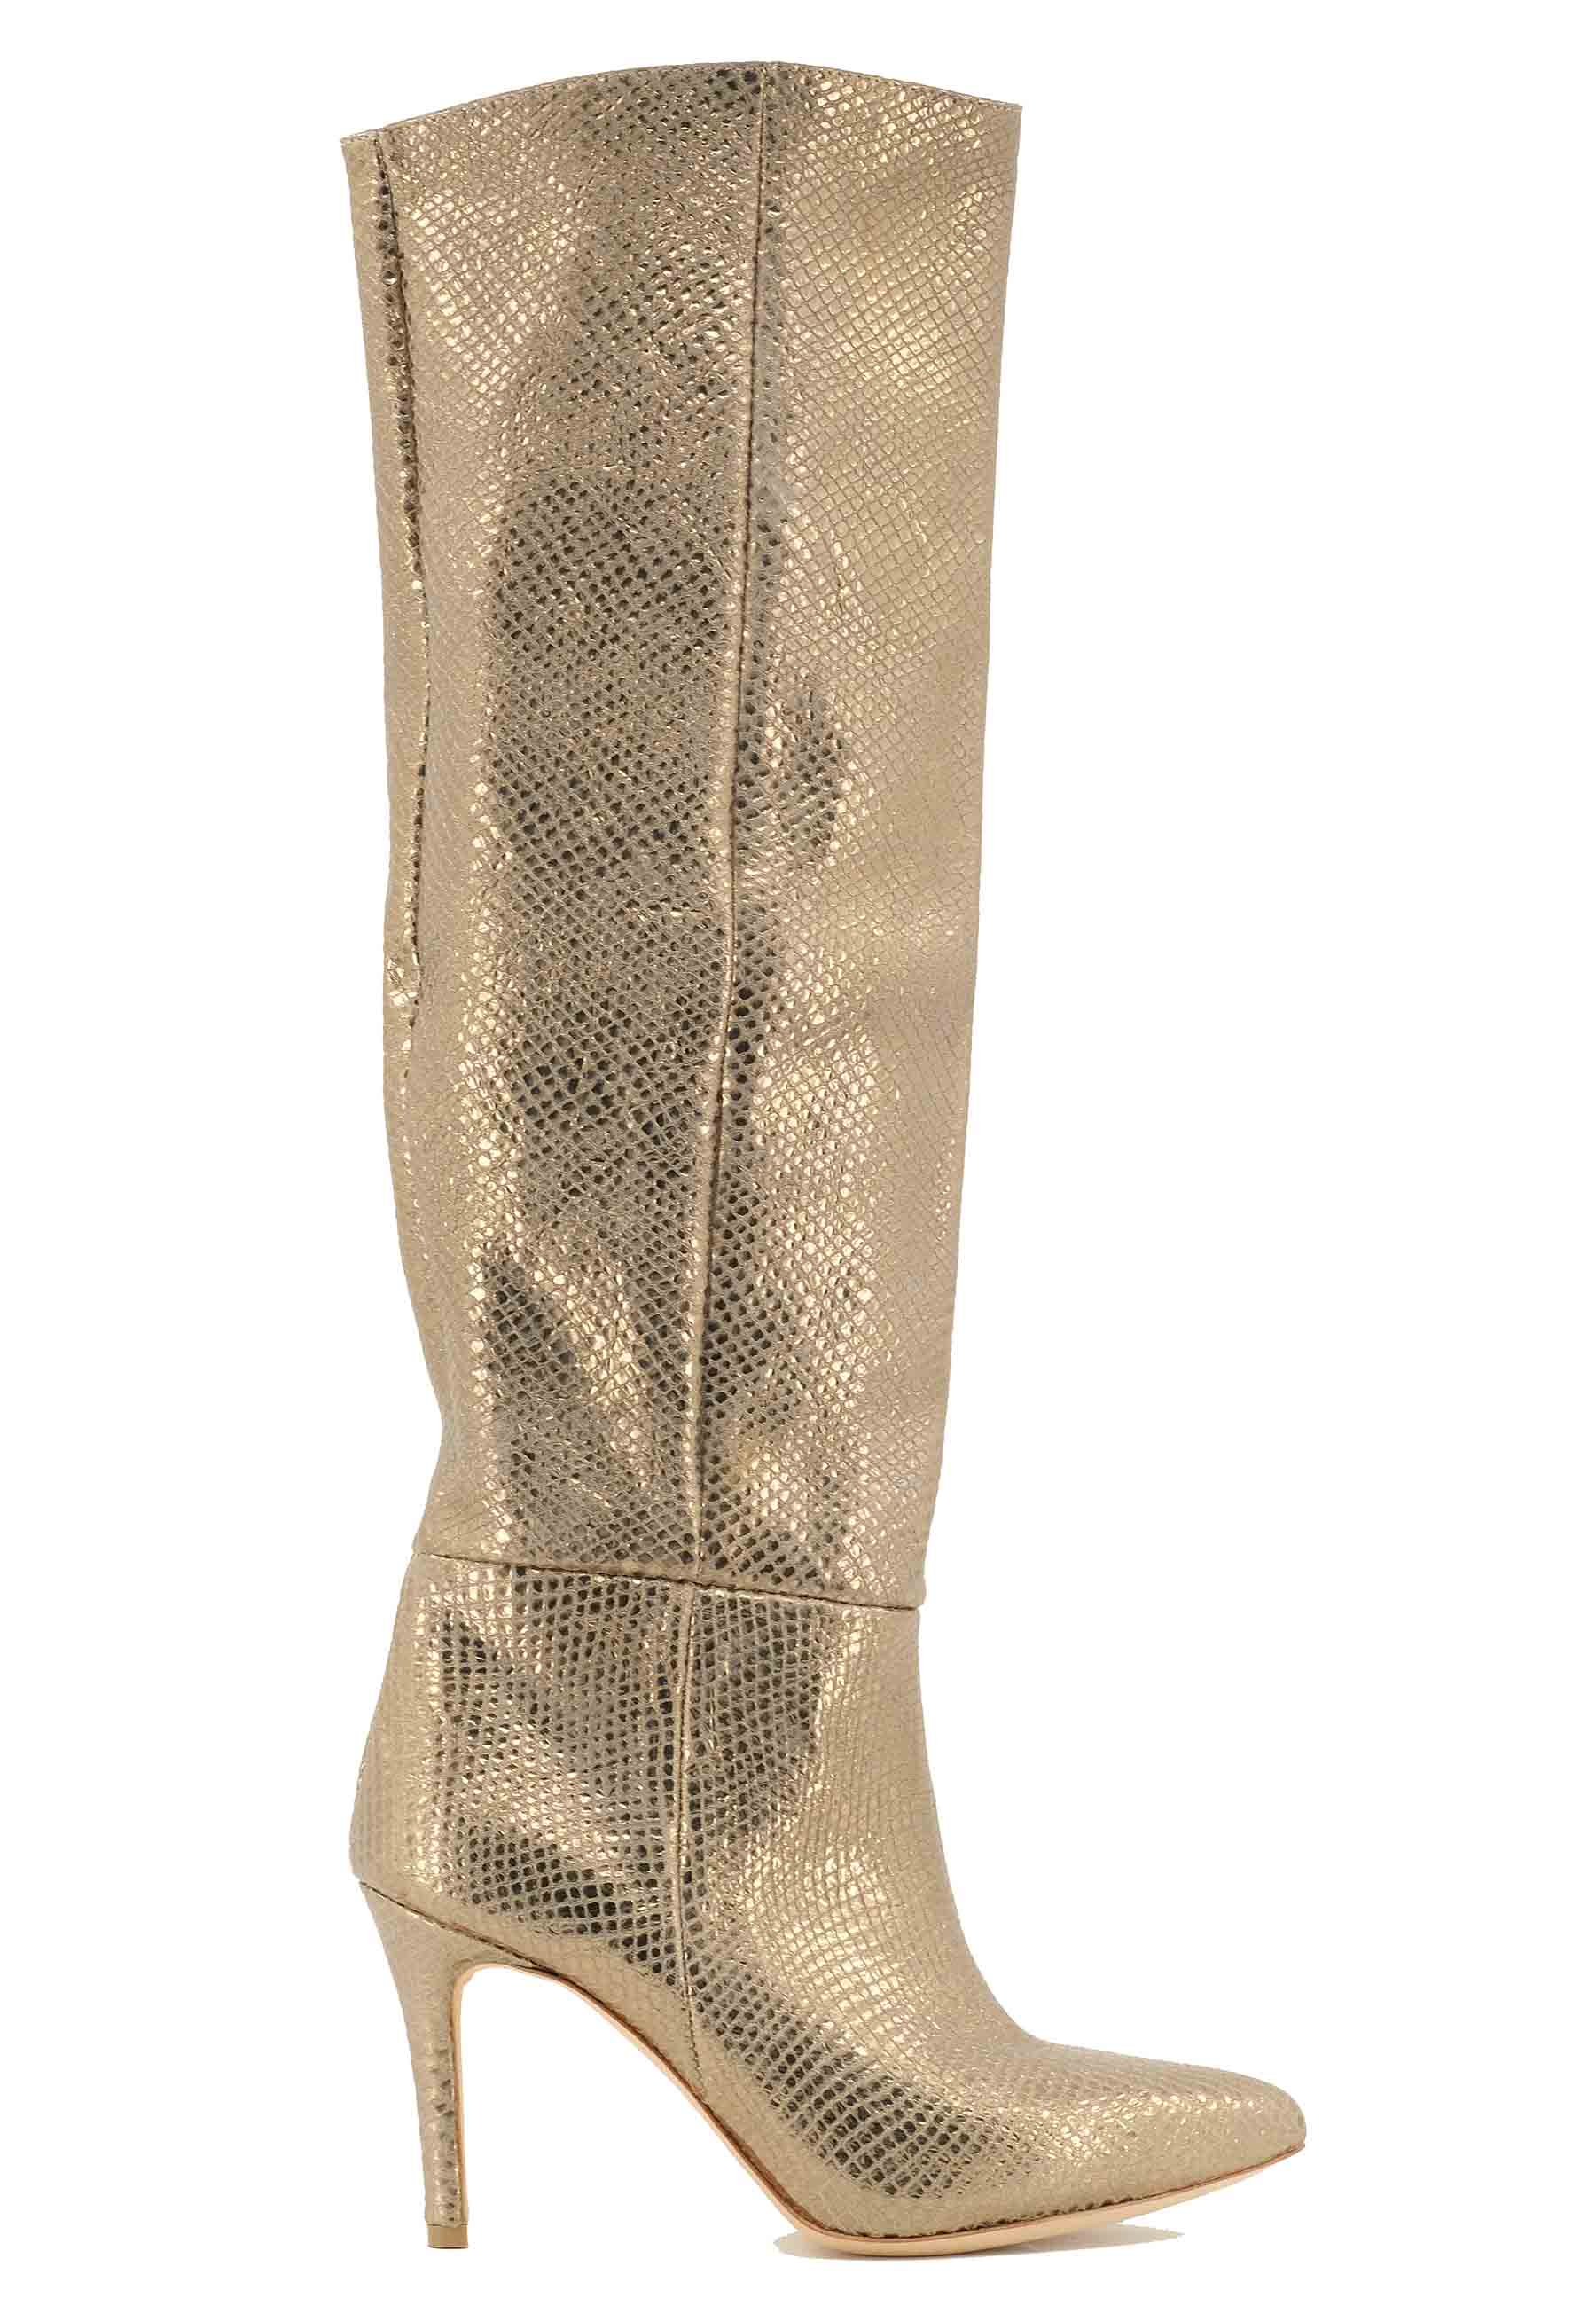 ST1242 boots in pearly platinum suede with high heel